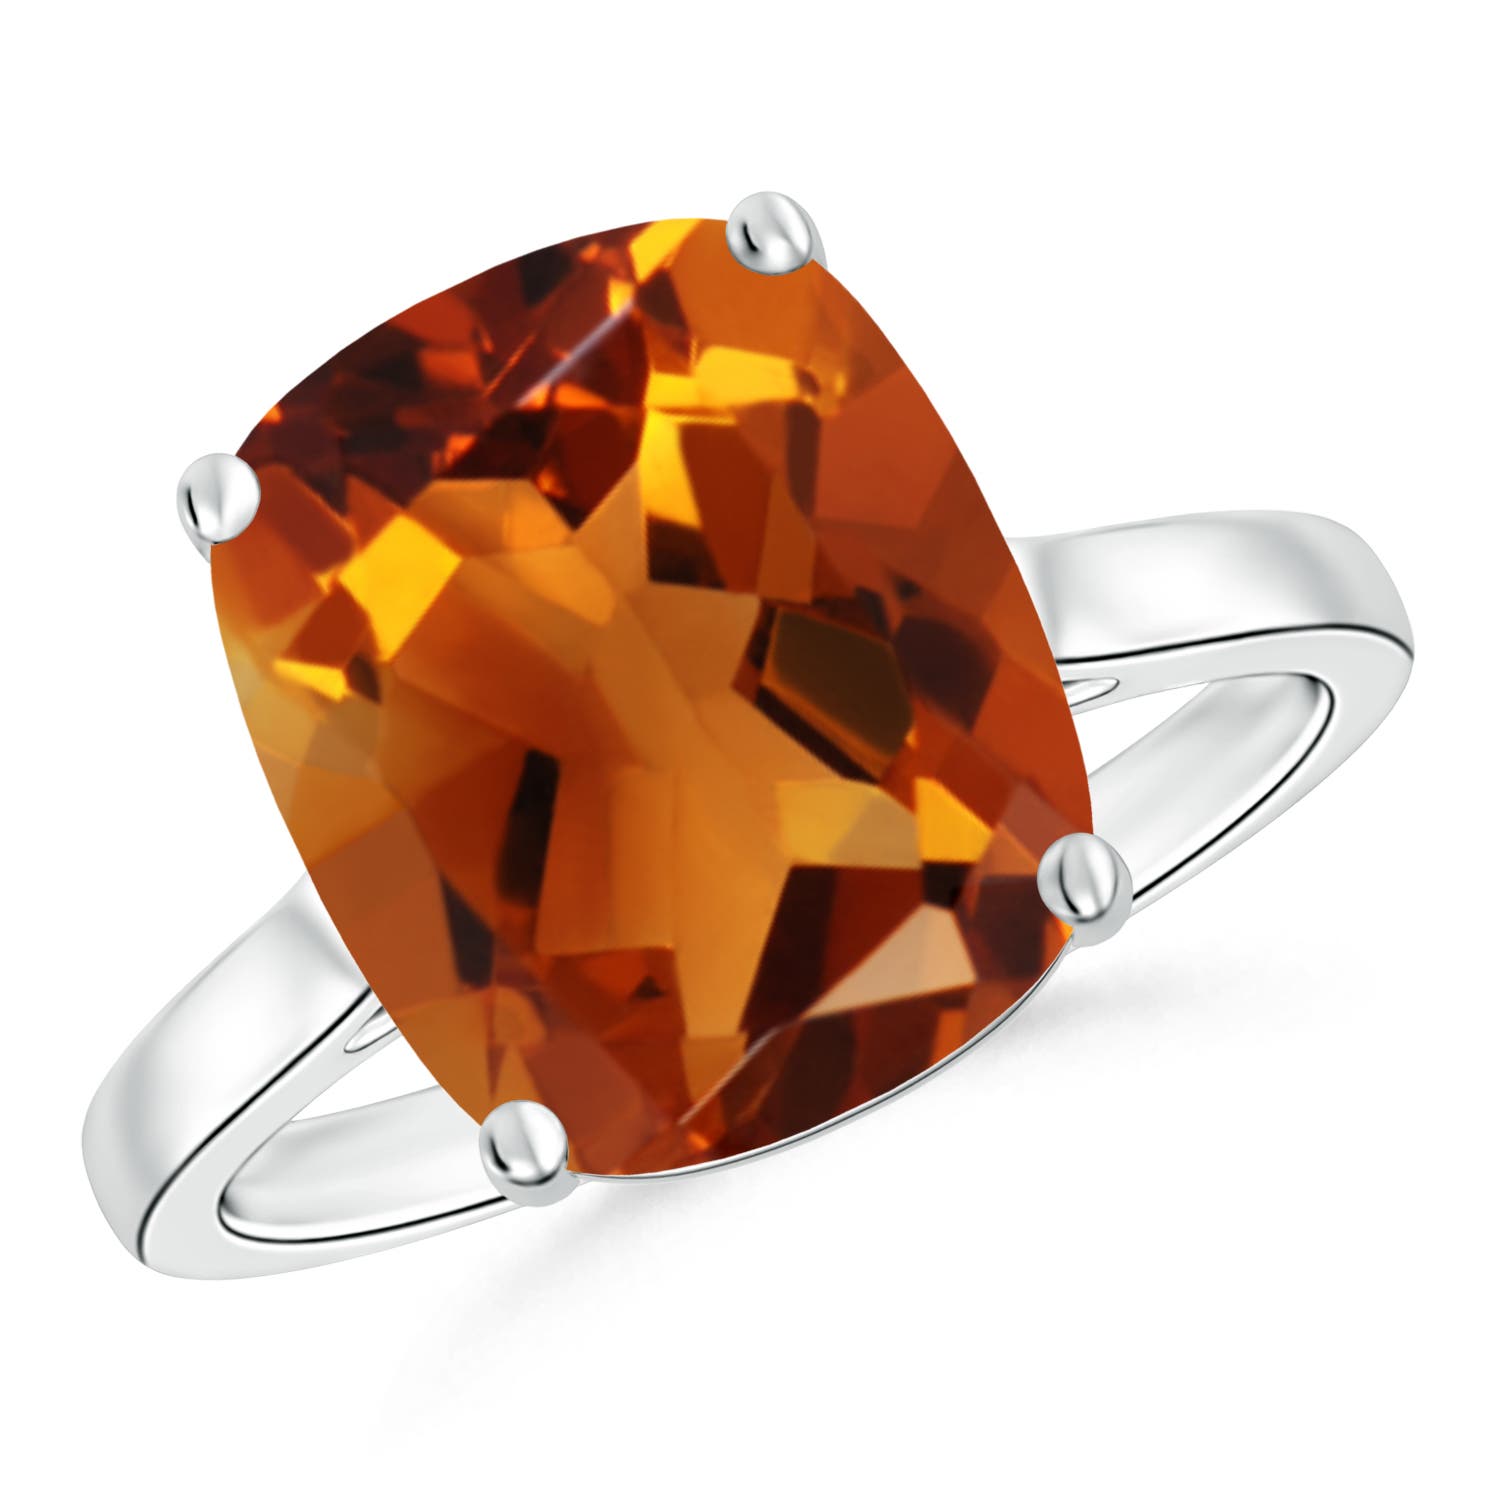 AAAA - Citrine / 4.74 CT / 14 KT White Gold